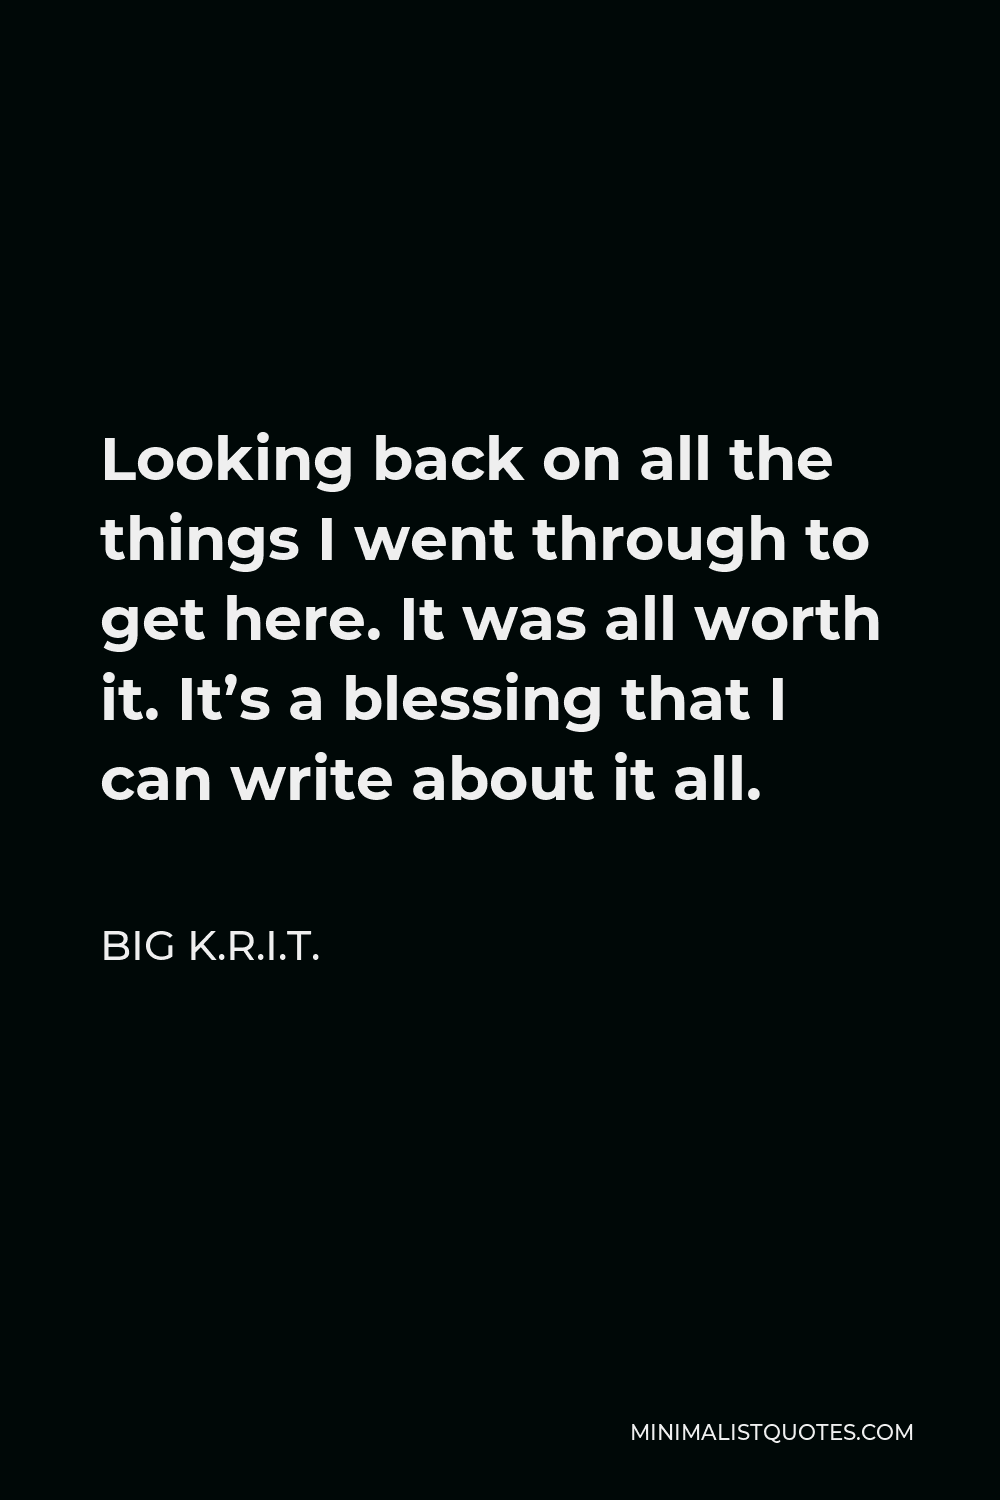 Big K.R.I.T. Quote - Looking back on all the things I went through to get here. It was all worth it. It’s a blessing that I can write about it all.